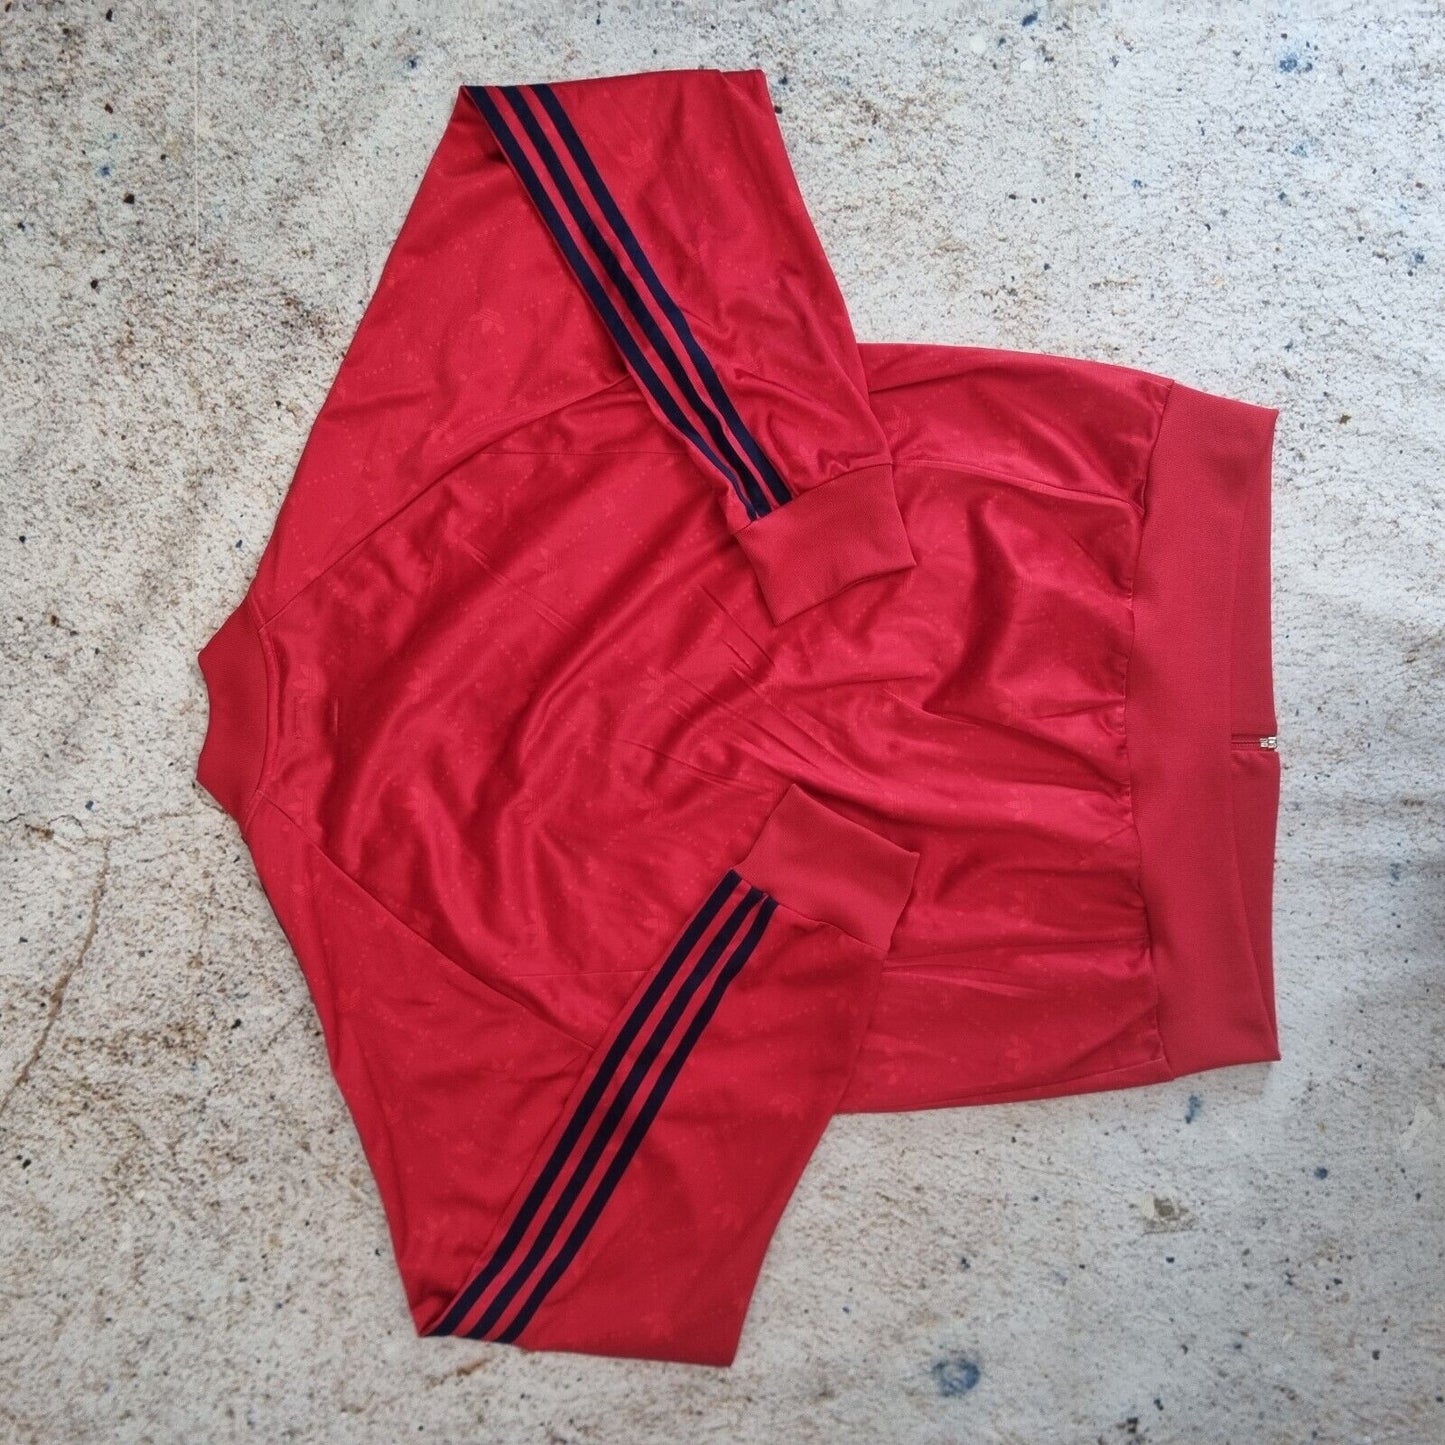 Adidas Track Jacket Logo Print Retro Style Track Top Size M Red